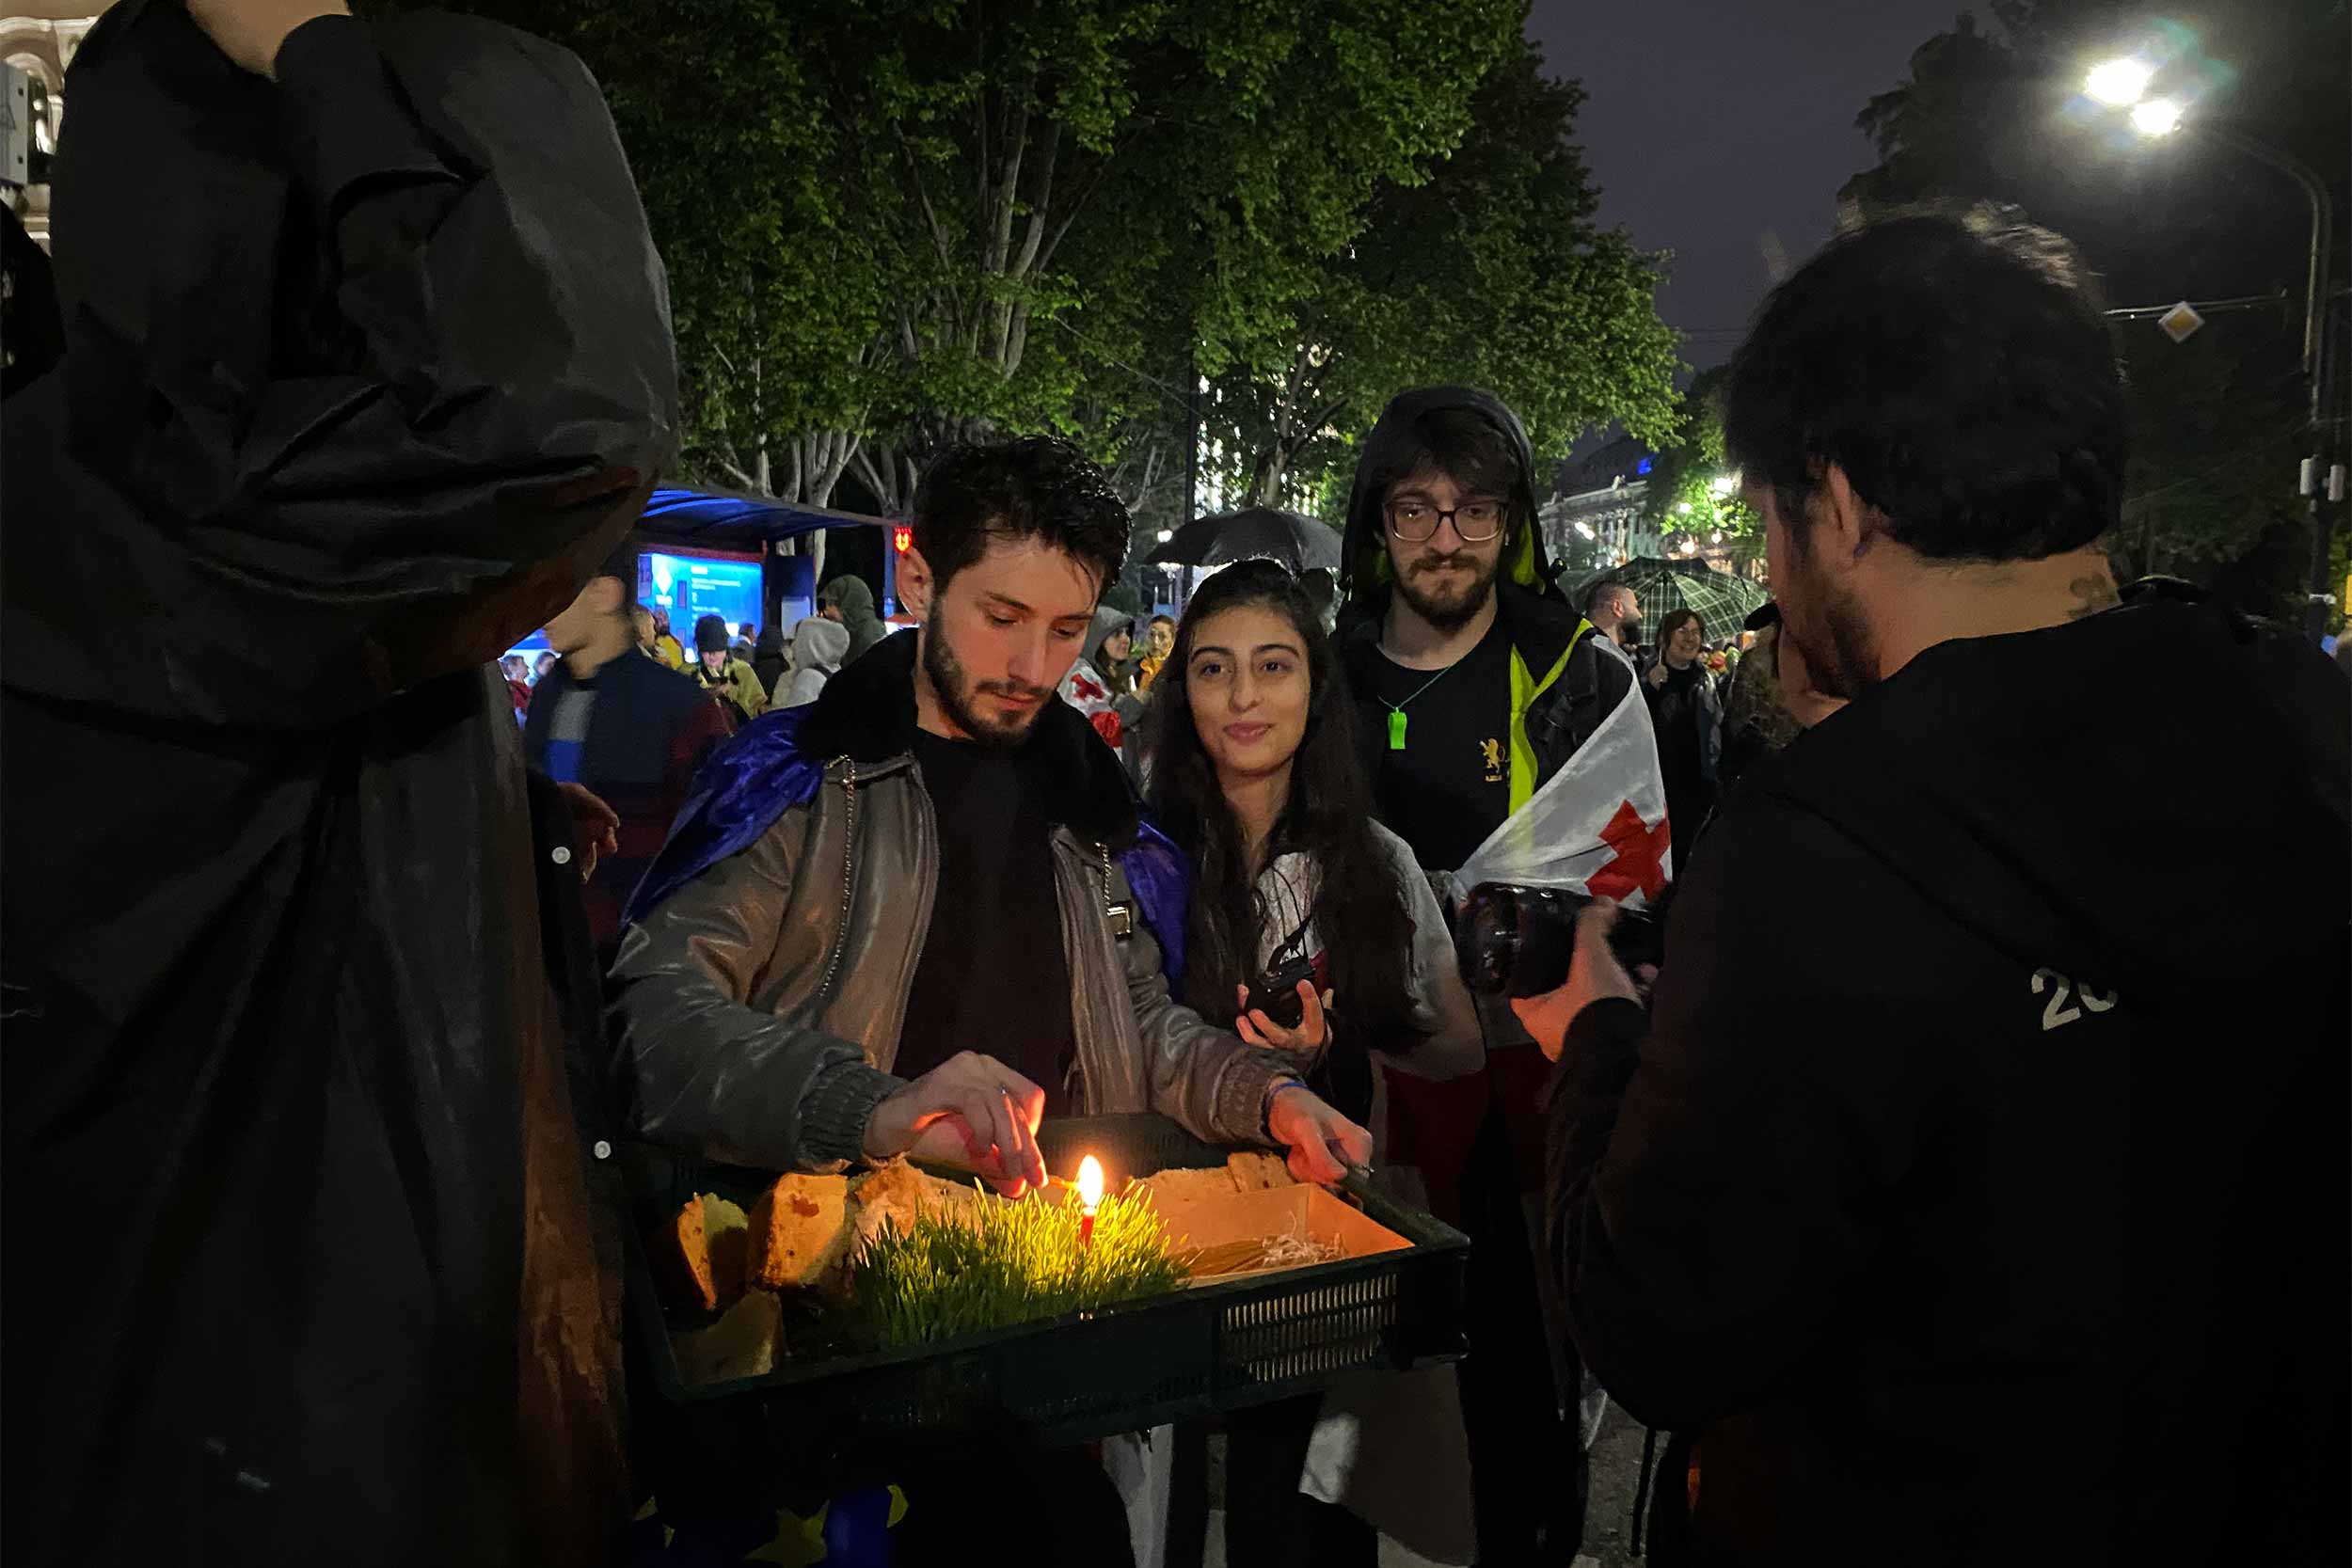 Young protesters are sharing Easter eggs and cakes for free in a symbolic act of reconciliation and mutual understanding. © Beka Bajelidze